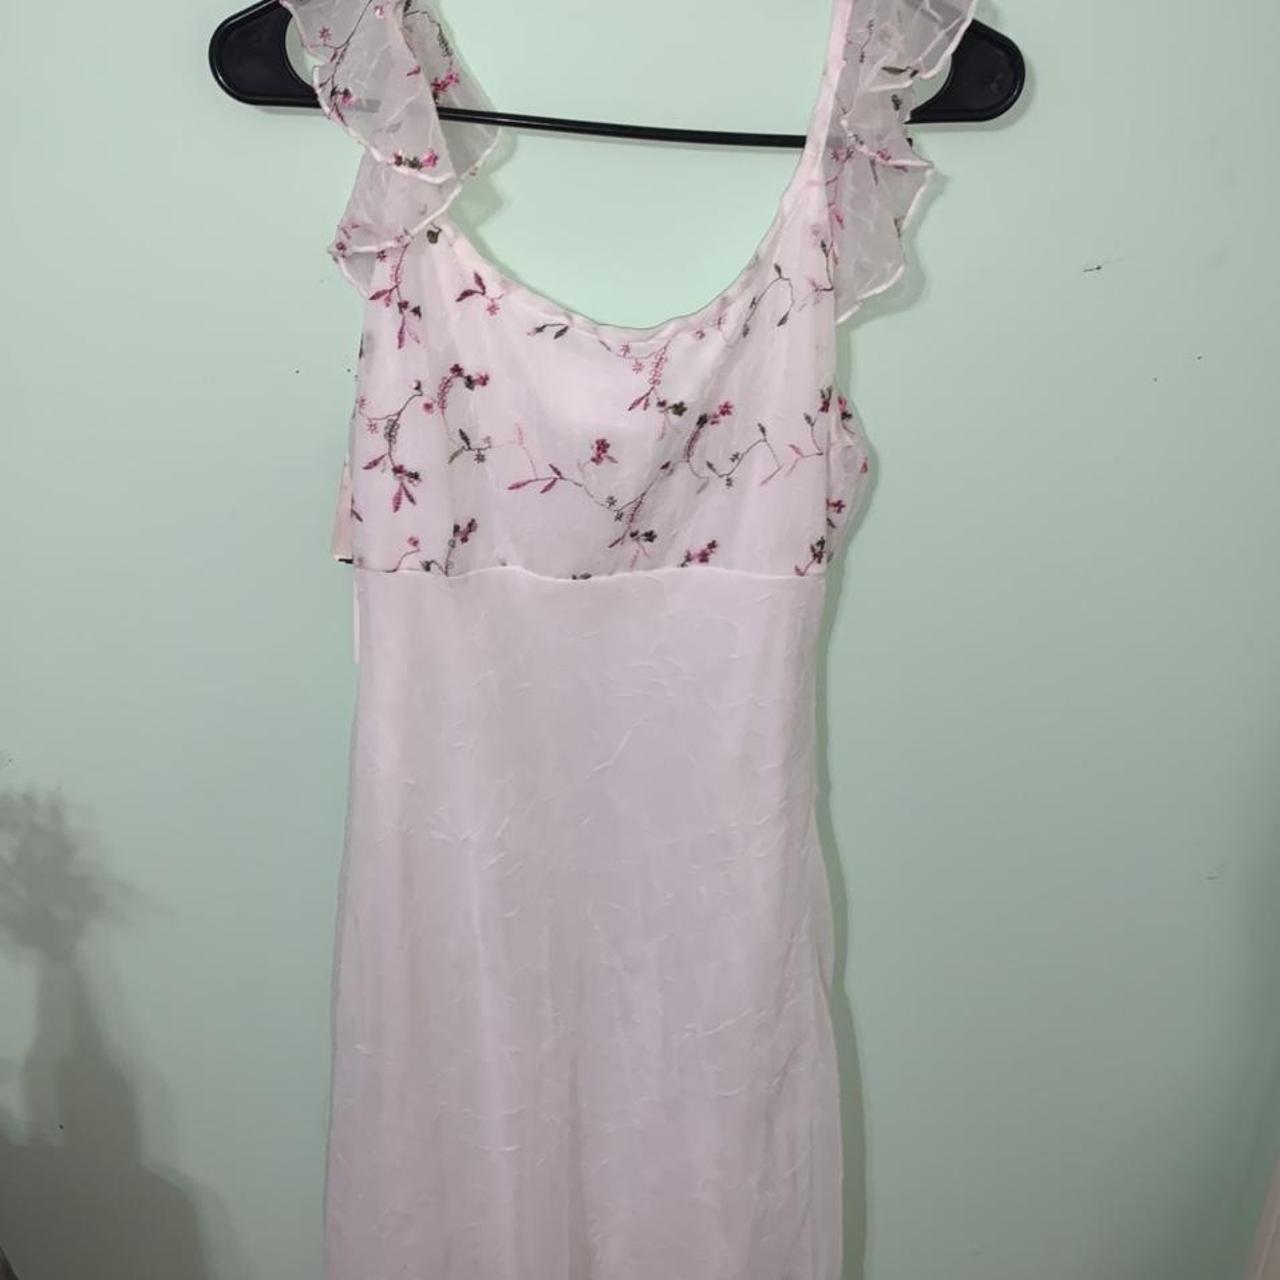 American Vintage Women's White and Pink Dress (6)